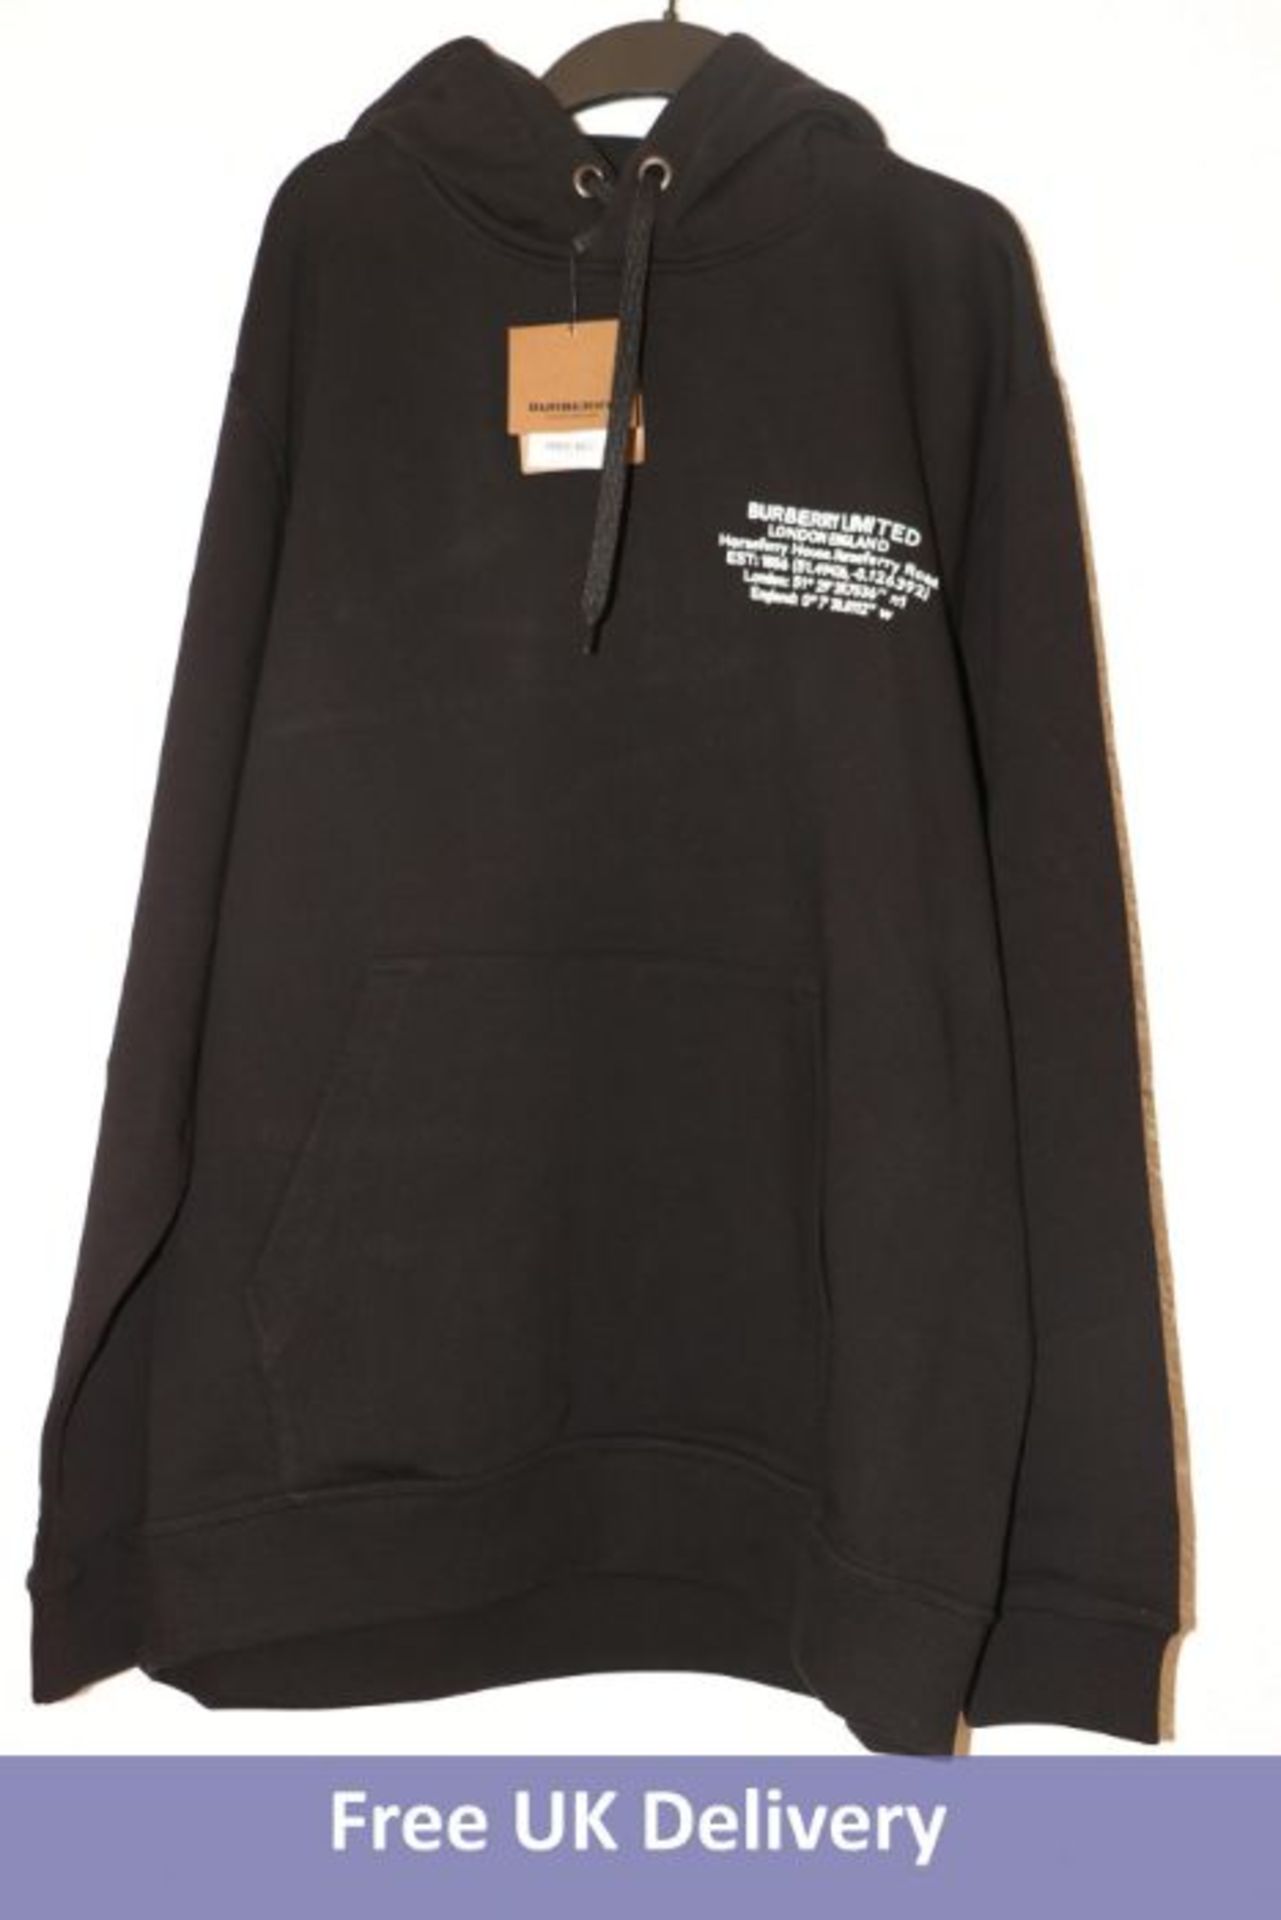 Burberry Allen Over The Head Hoodie, Black, Size XXL. Faulty - Missing Dot Symbol